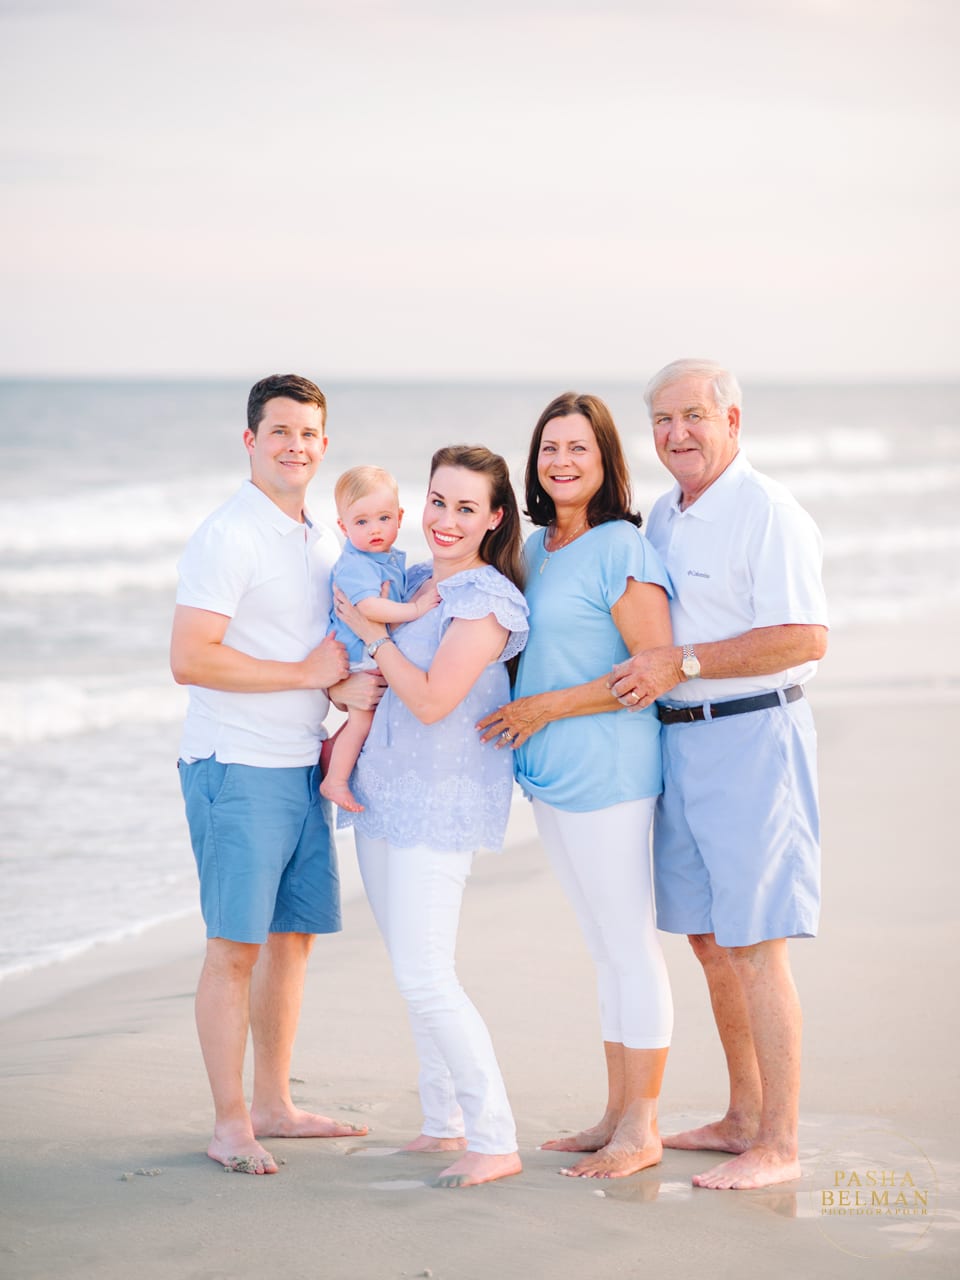 This sessions was photographed in Pawleys Island, South Carolina by Pasha Belman Photography. Top Family Photographers in Pawleys Island and Litchfield Beach